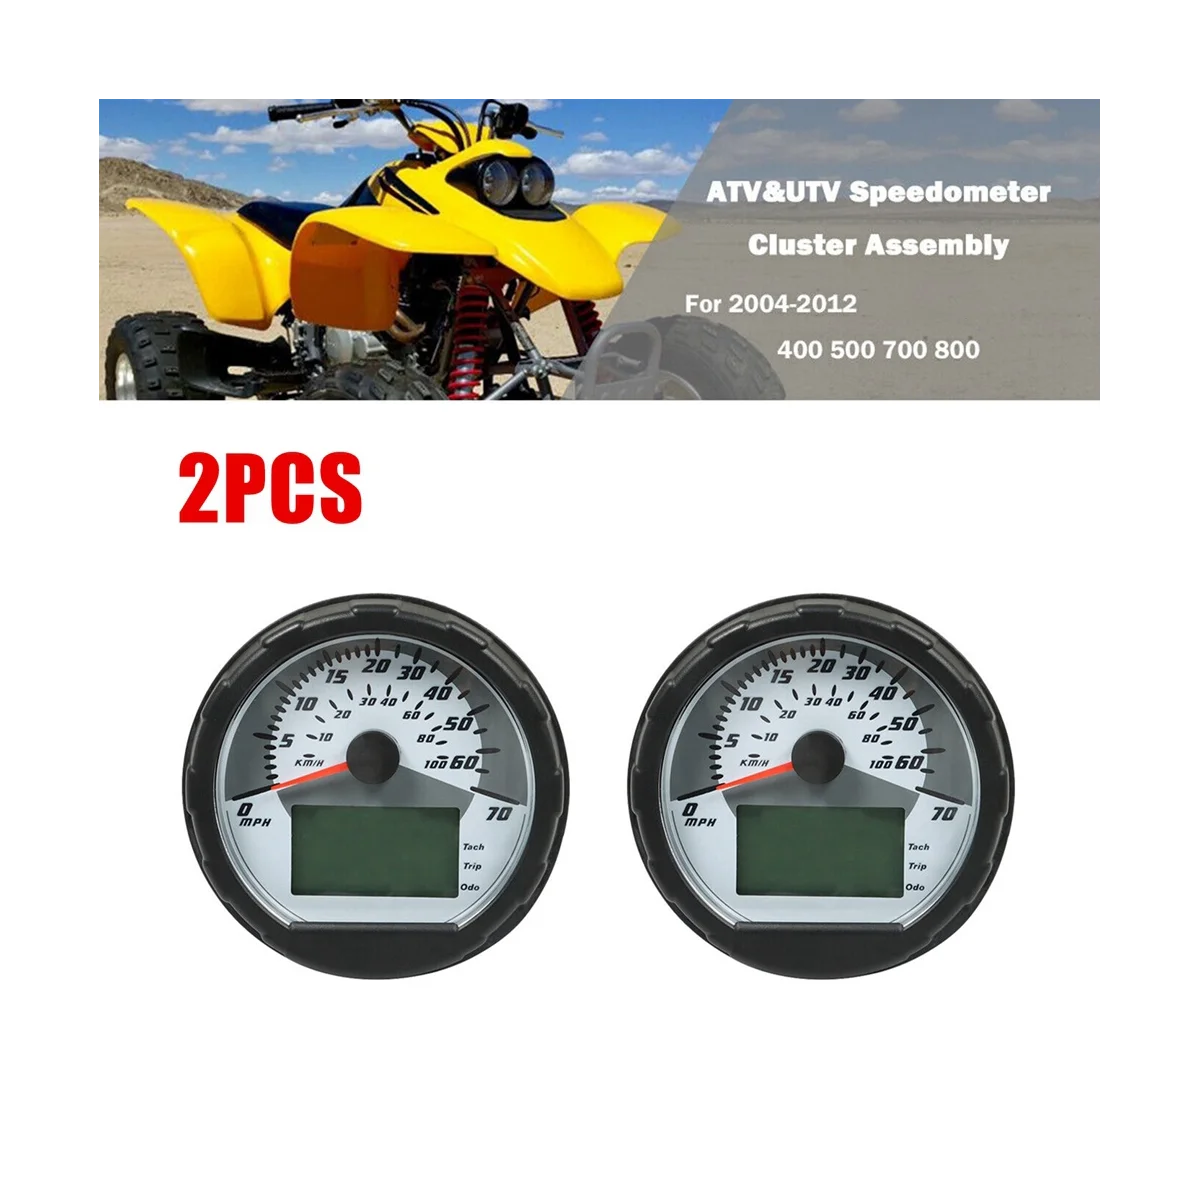 

2X ATV Speedometer Cluster Assembly Fits for Polaris Sportsman 400 500 700 800 3280431